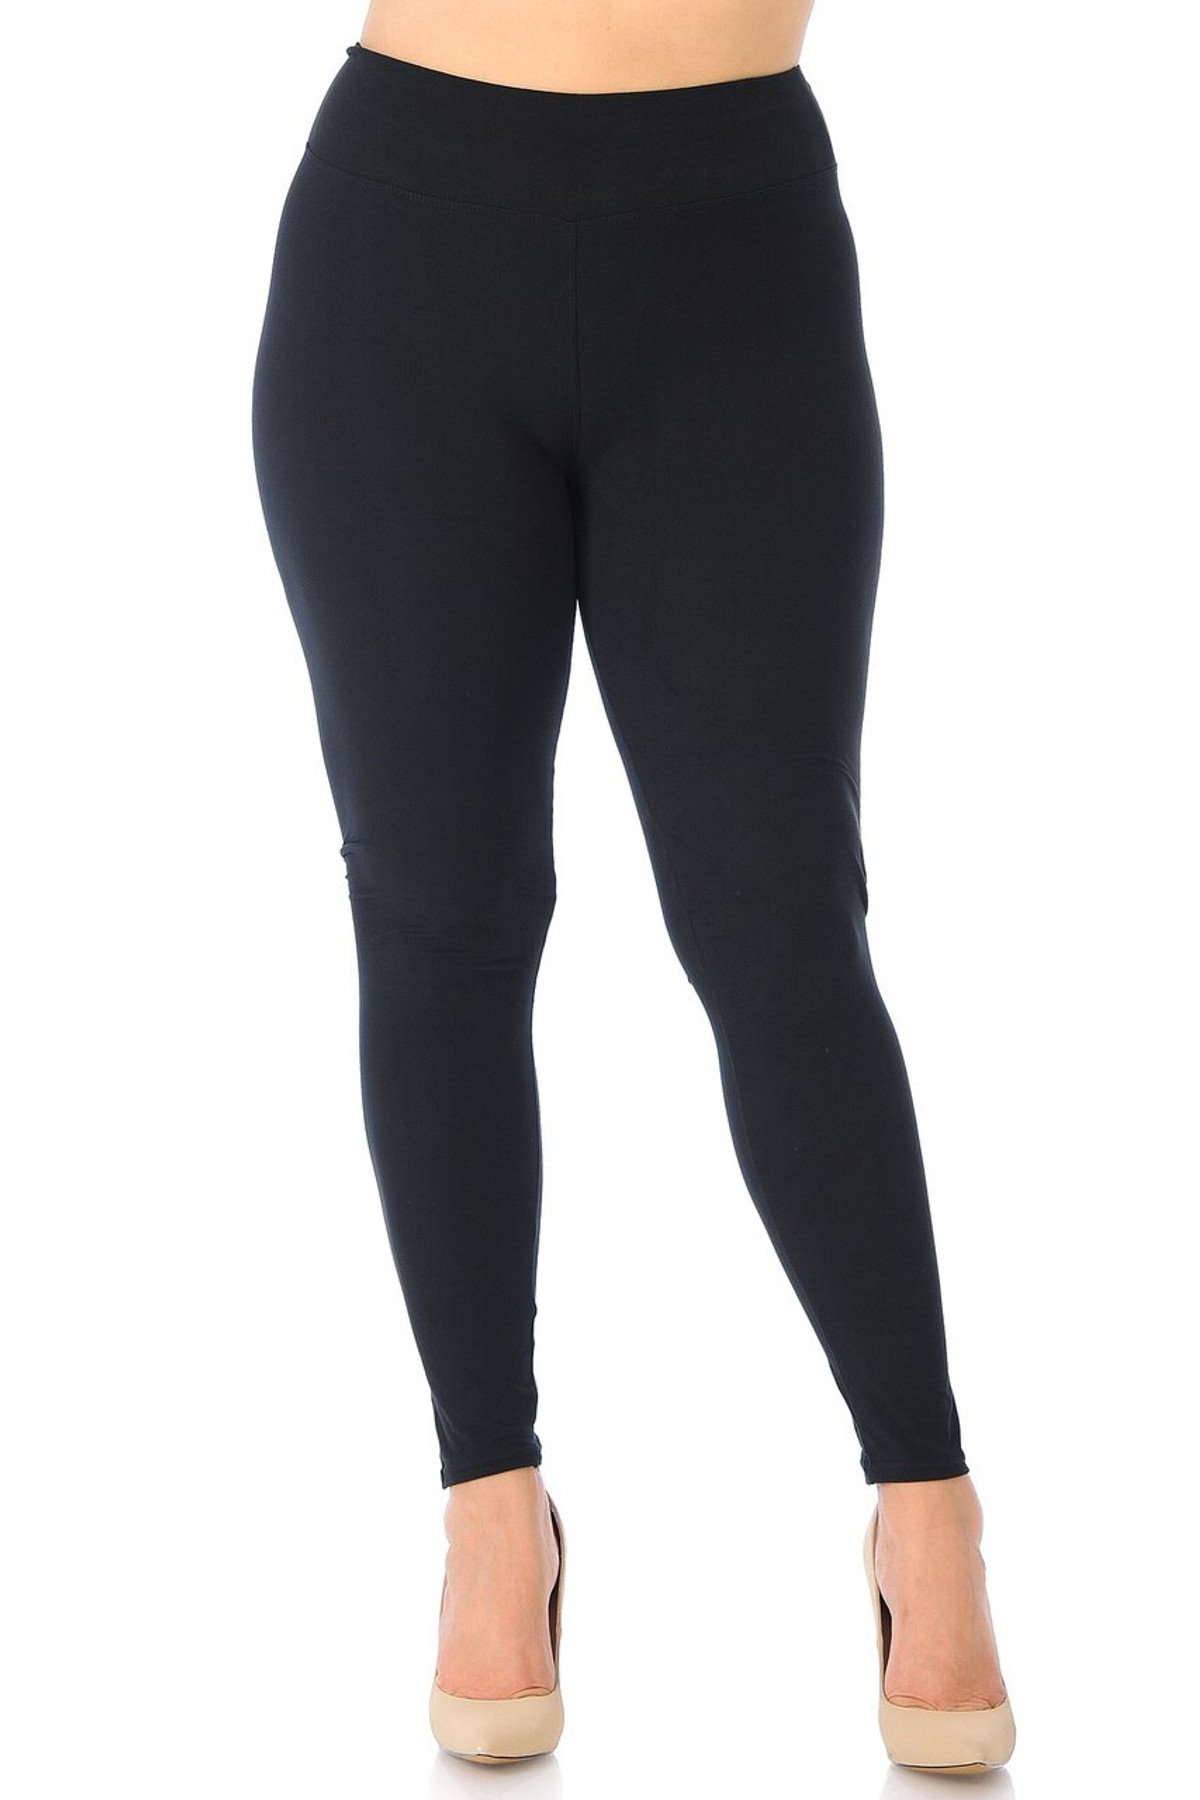 Wholesale Buttery Soft High Waisted Plus Size Basic Solid Leggings - 3 ...